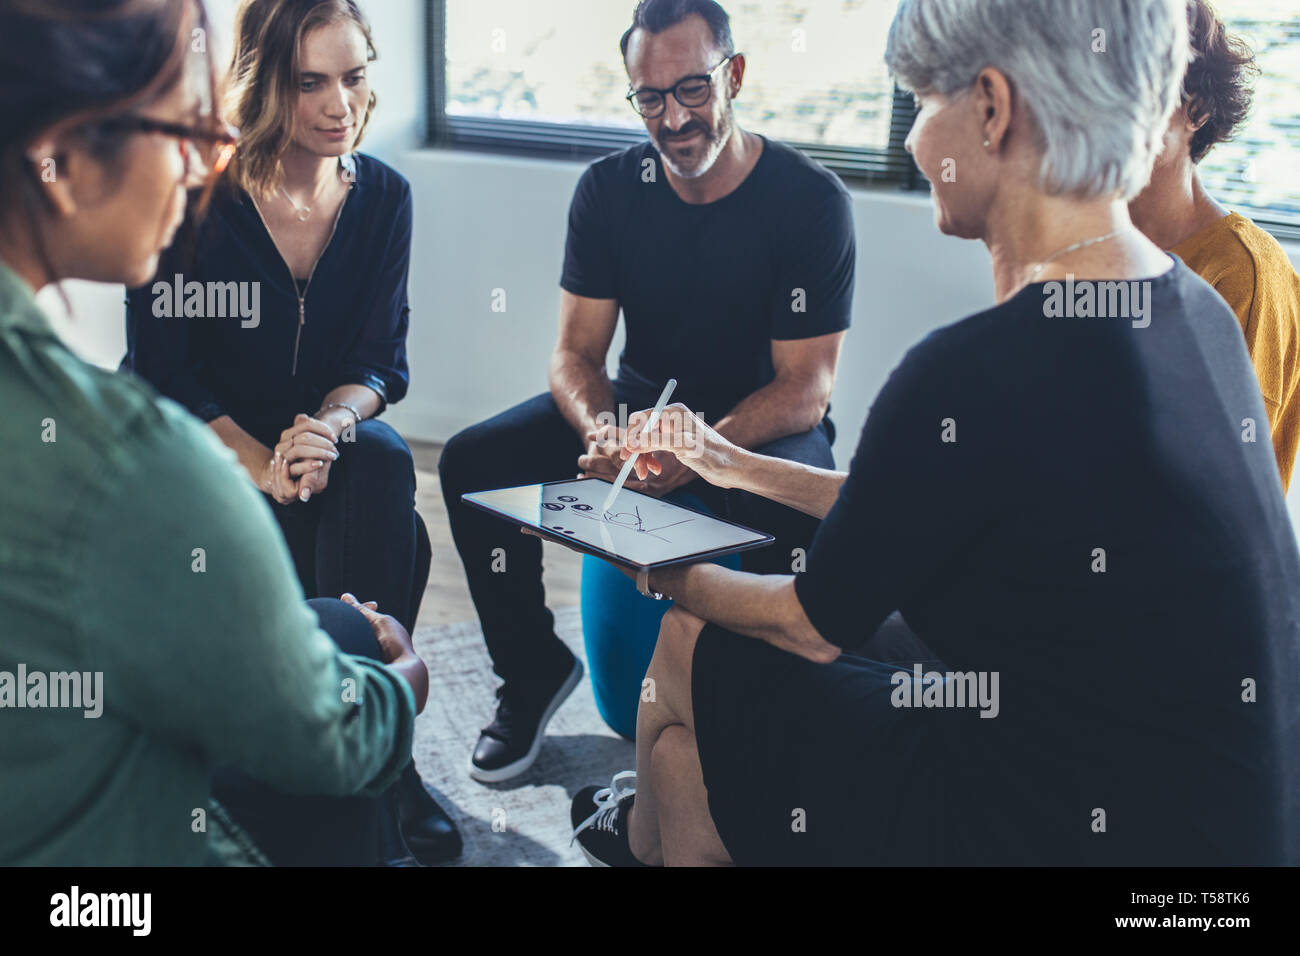 Multi-ethnic group of people sitting together having a group discussion. Business people having a meeting on new working strategies. Stock Photo